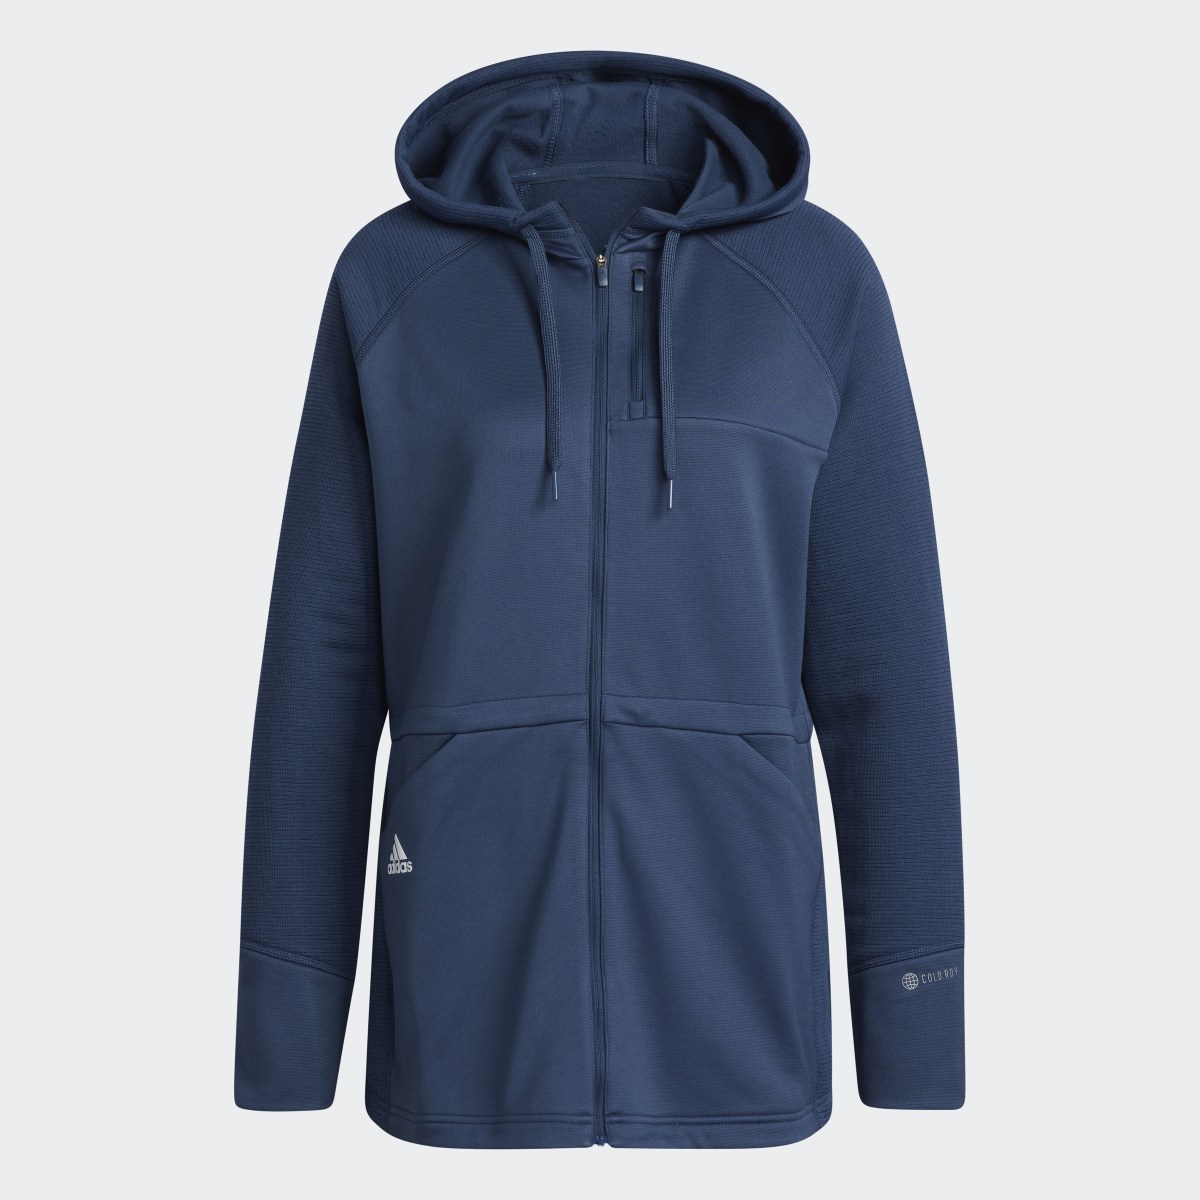 Adidas COLD.RDY Full-Zip Parka. 5